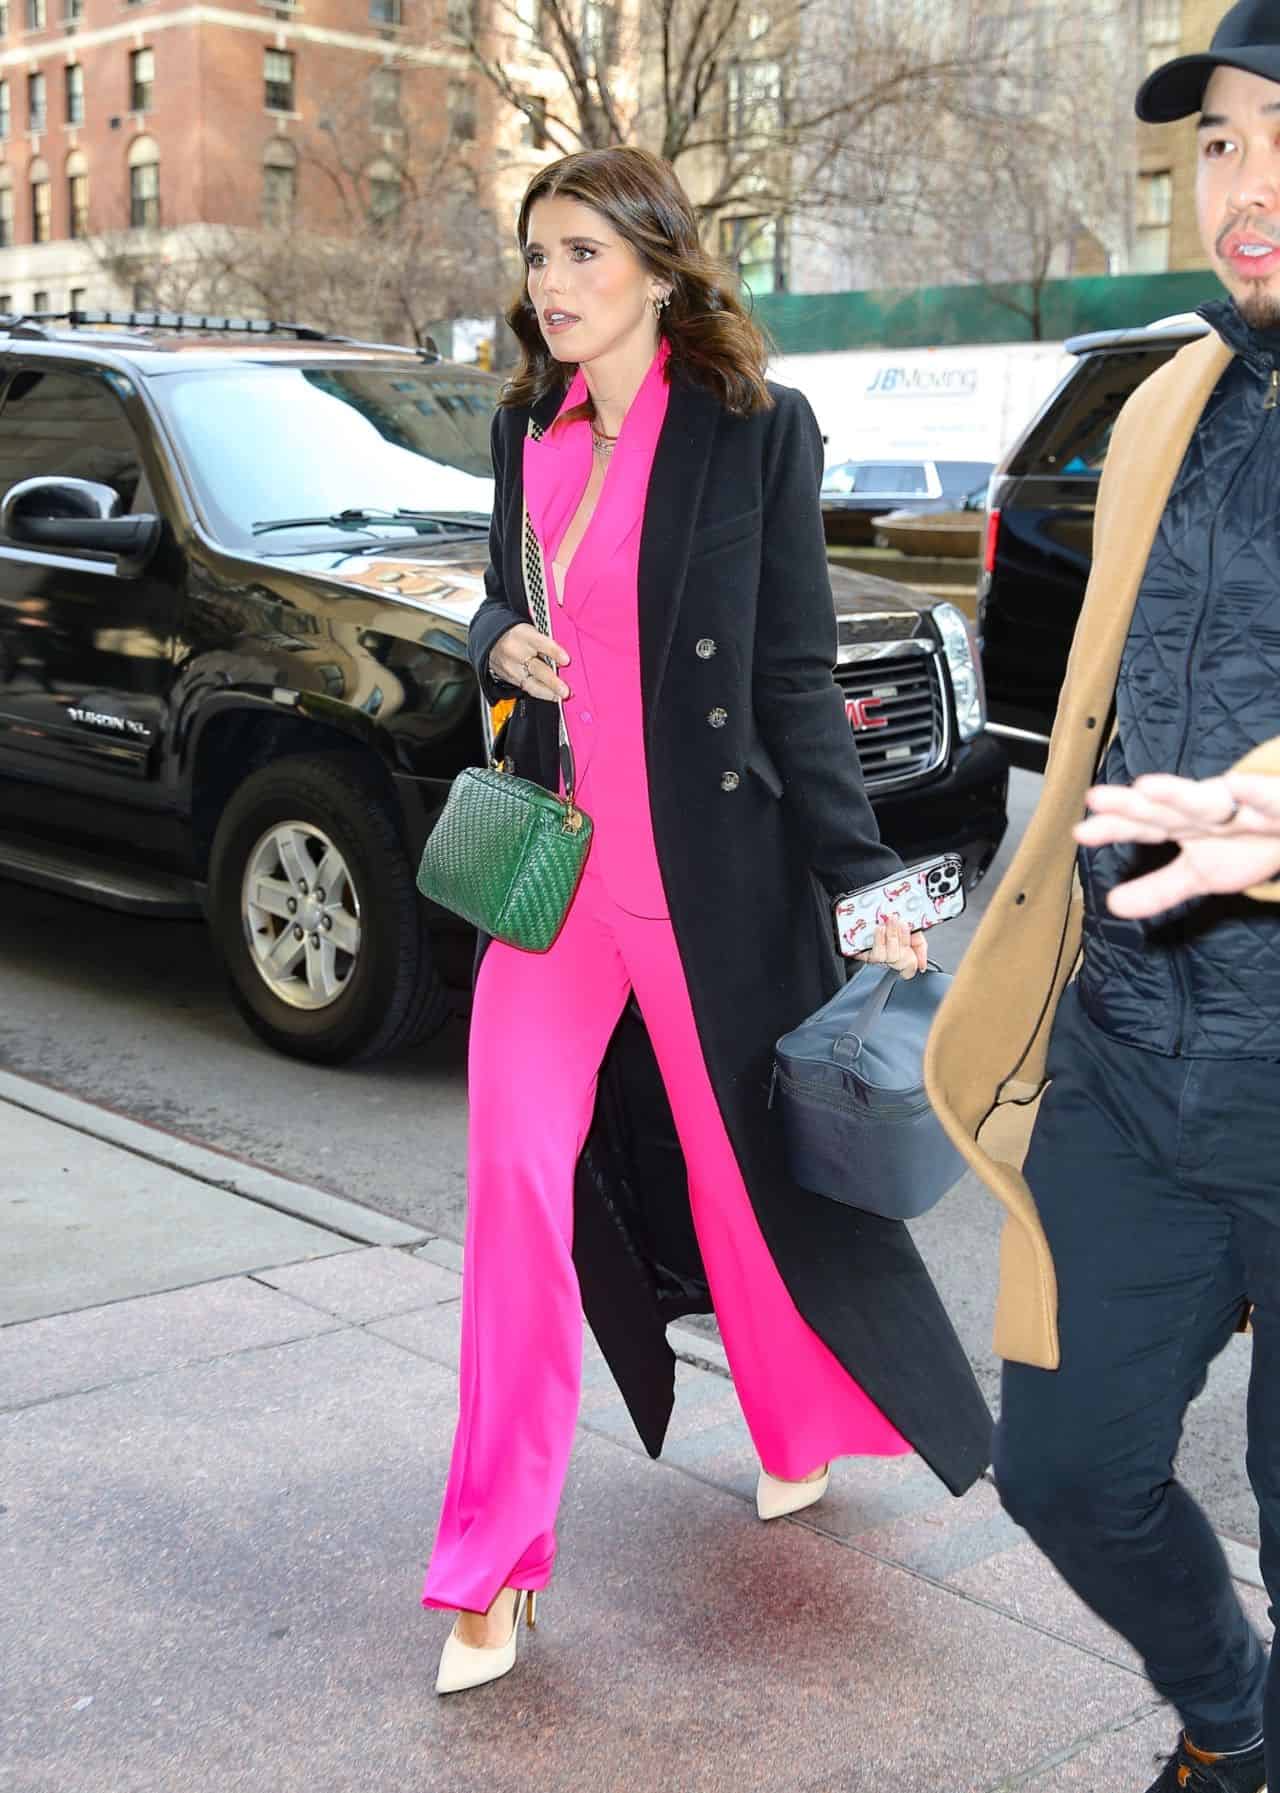 Katherine Schwarzenegger Commands Attention in Hot Pink Outfit in NYC